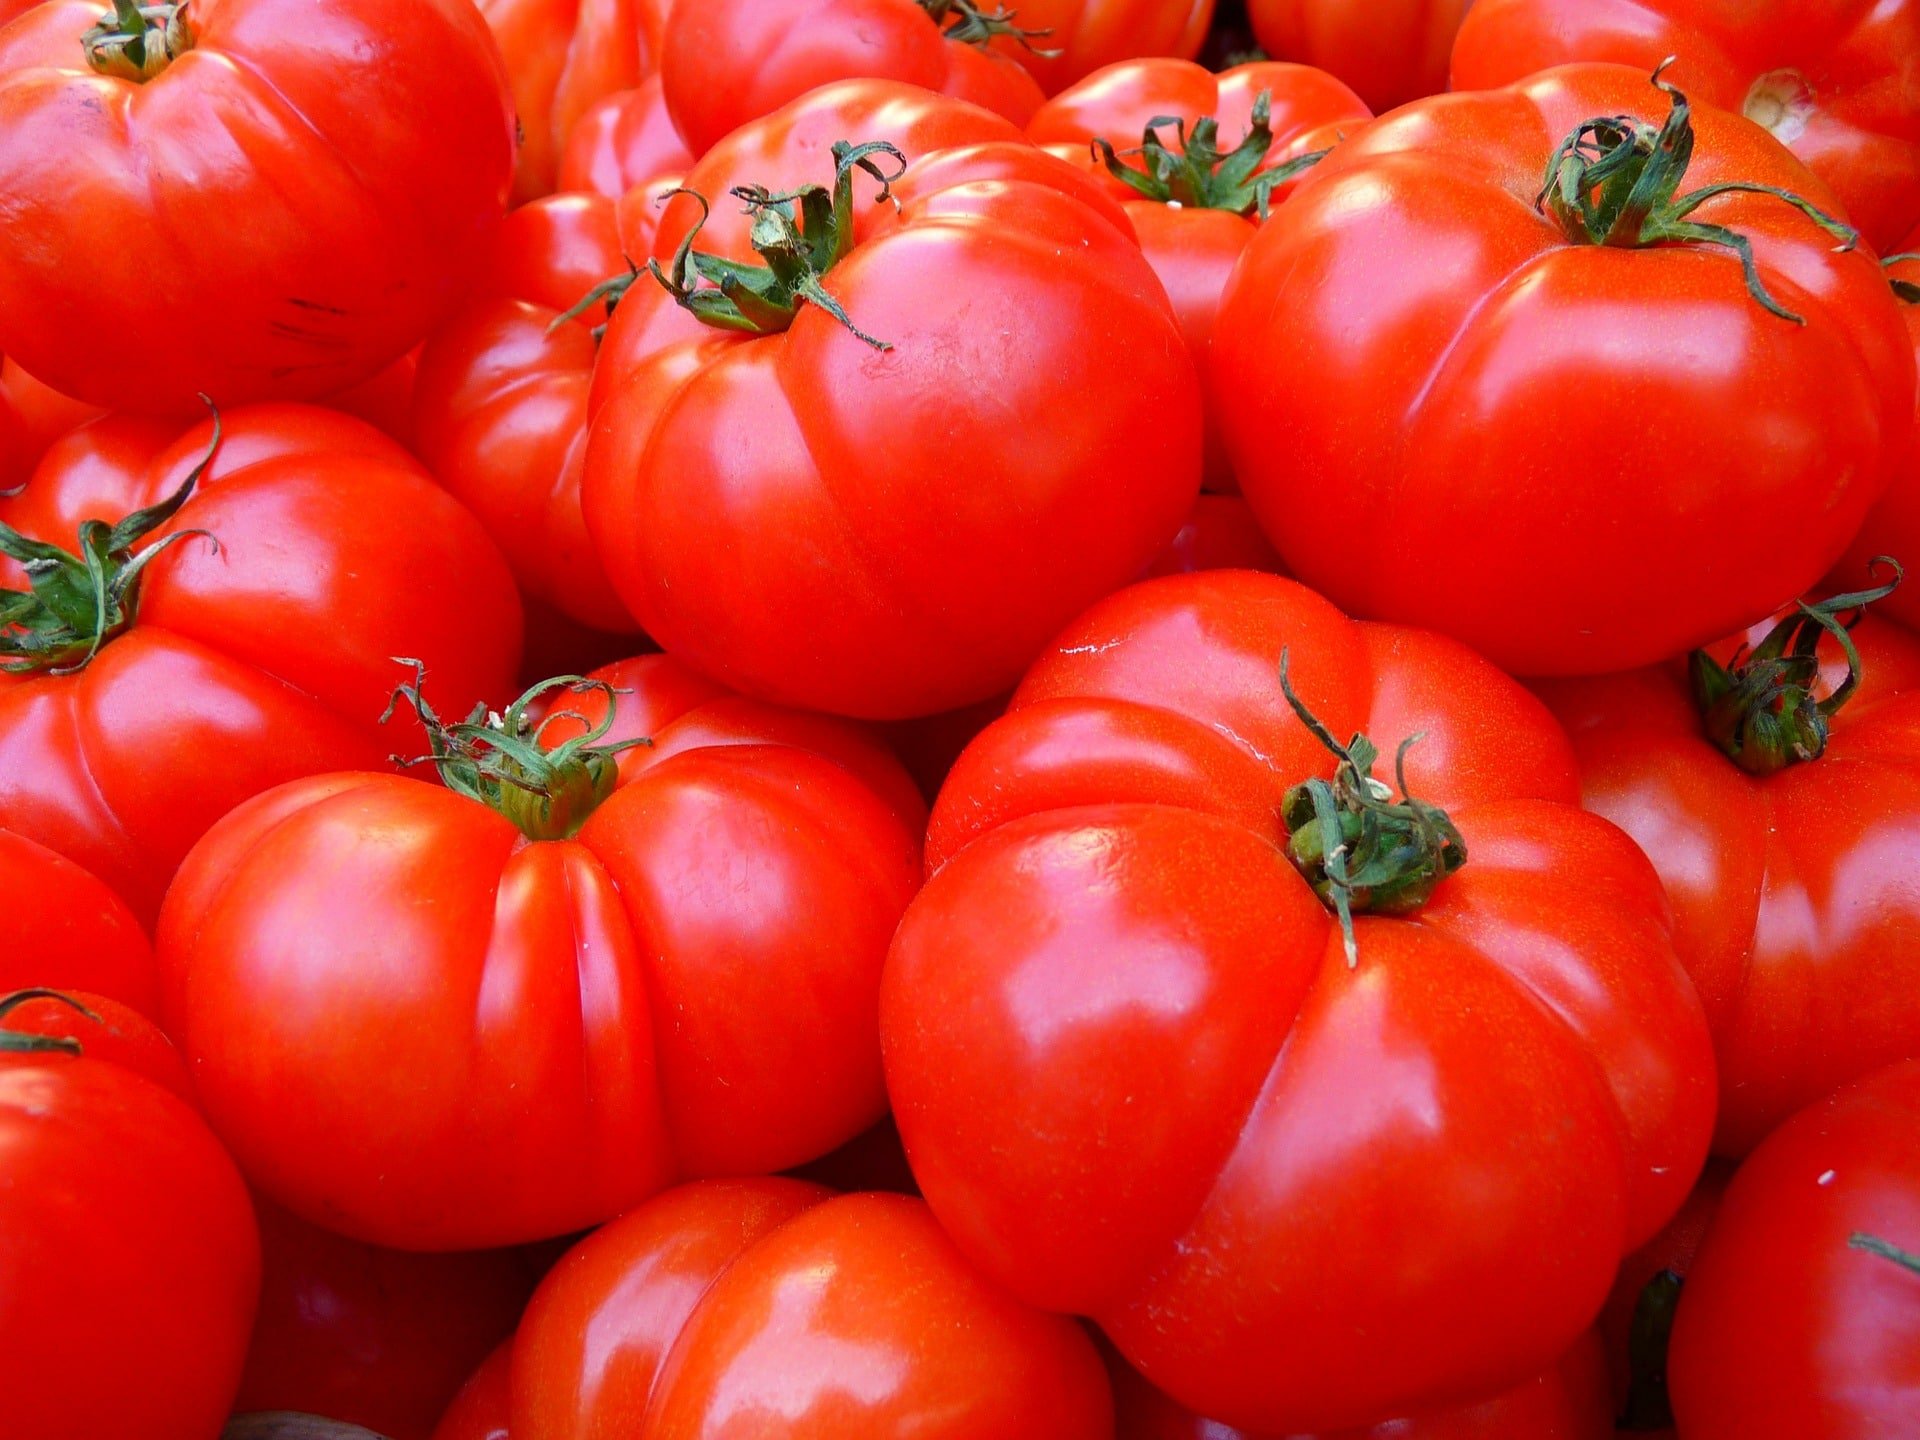 A close up of a pile of tomatoes.